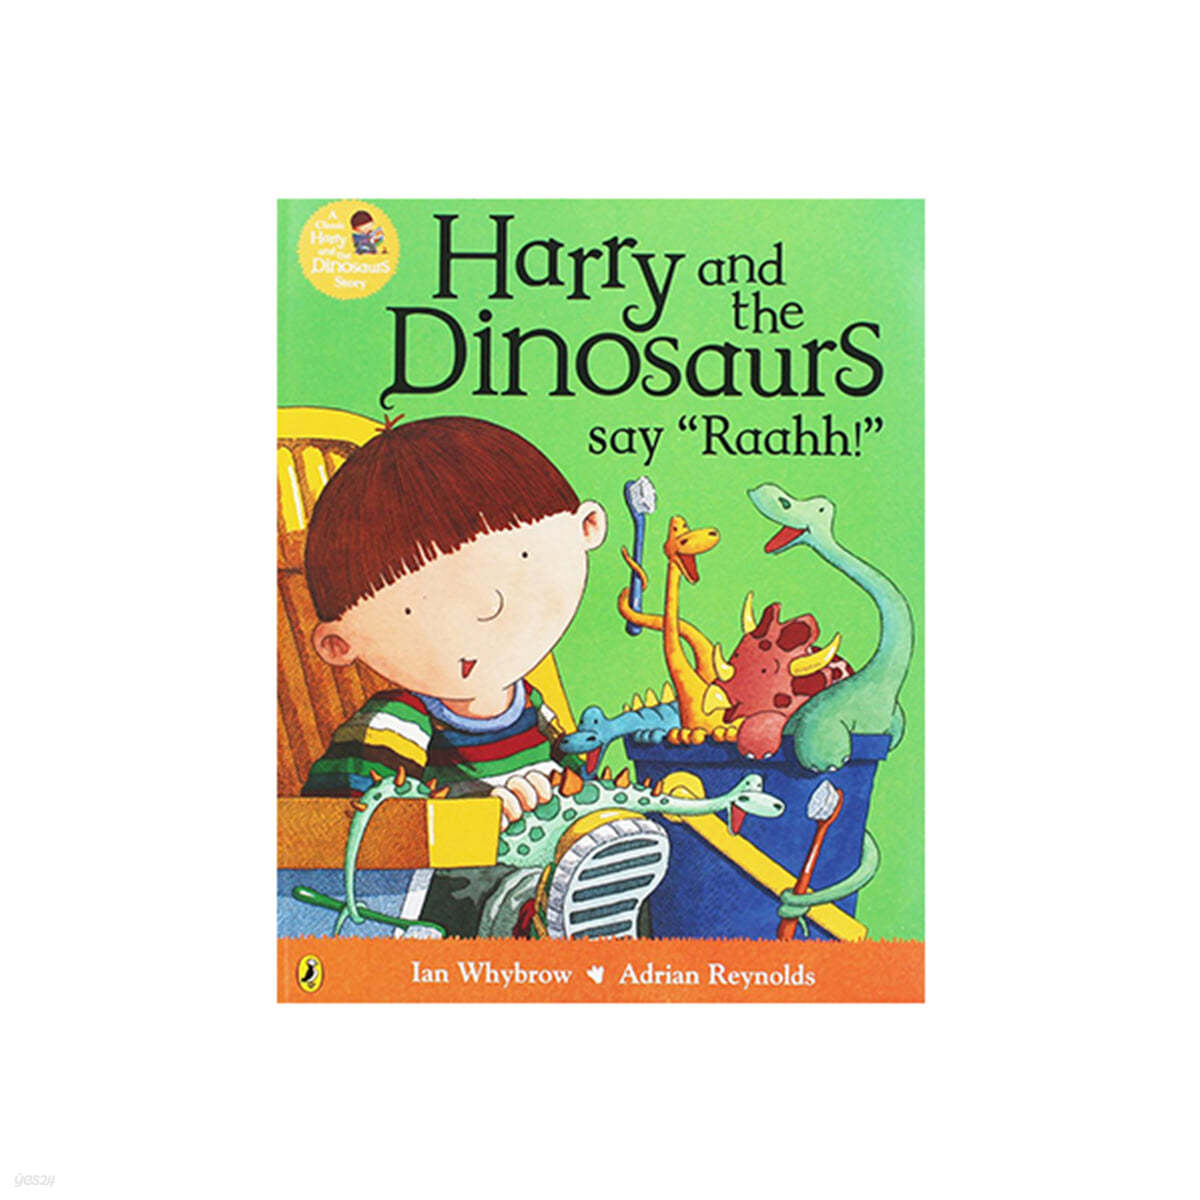 Harry and the Dinosaurs say Raahh!